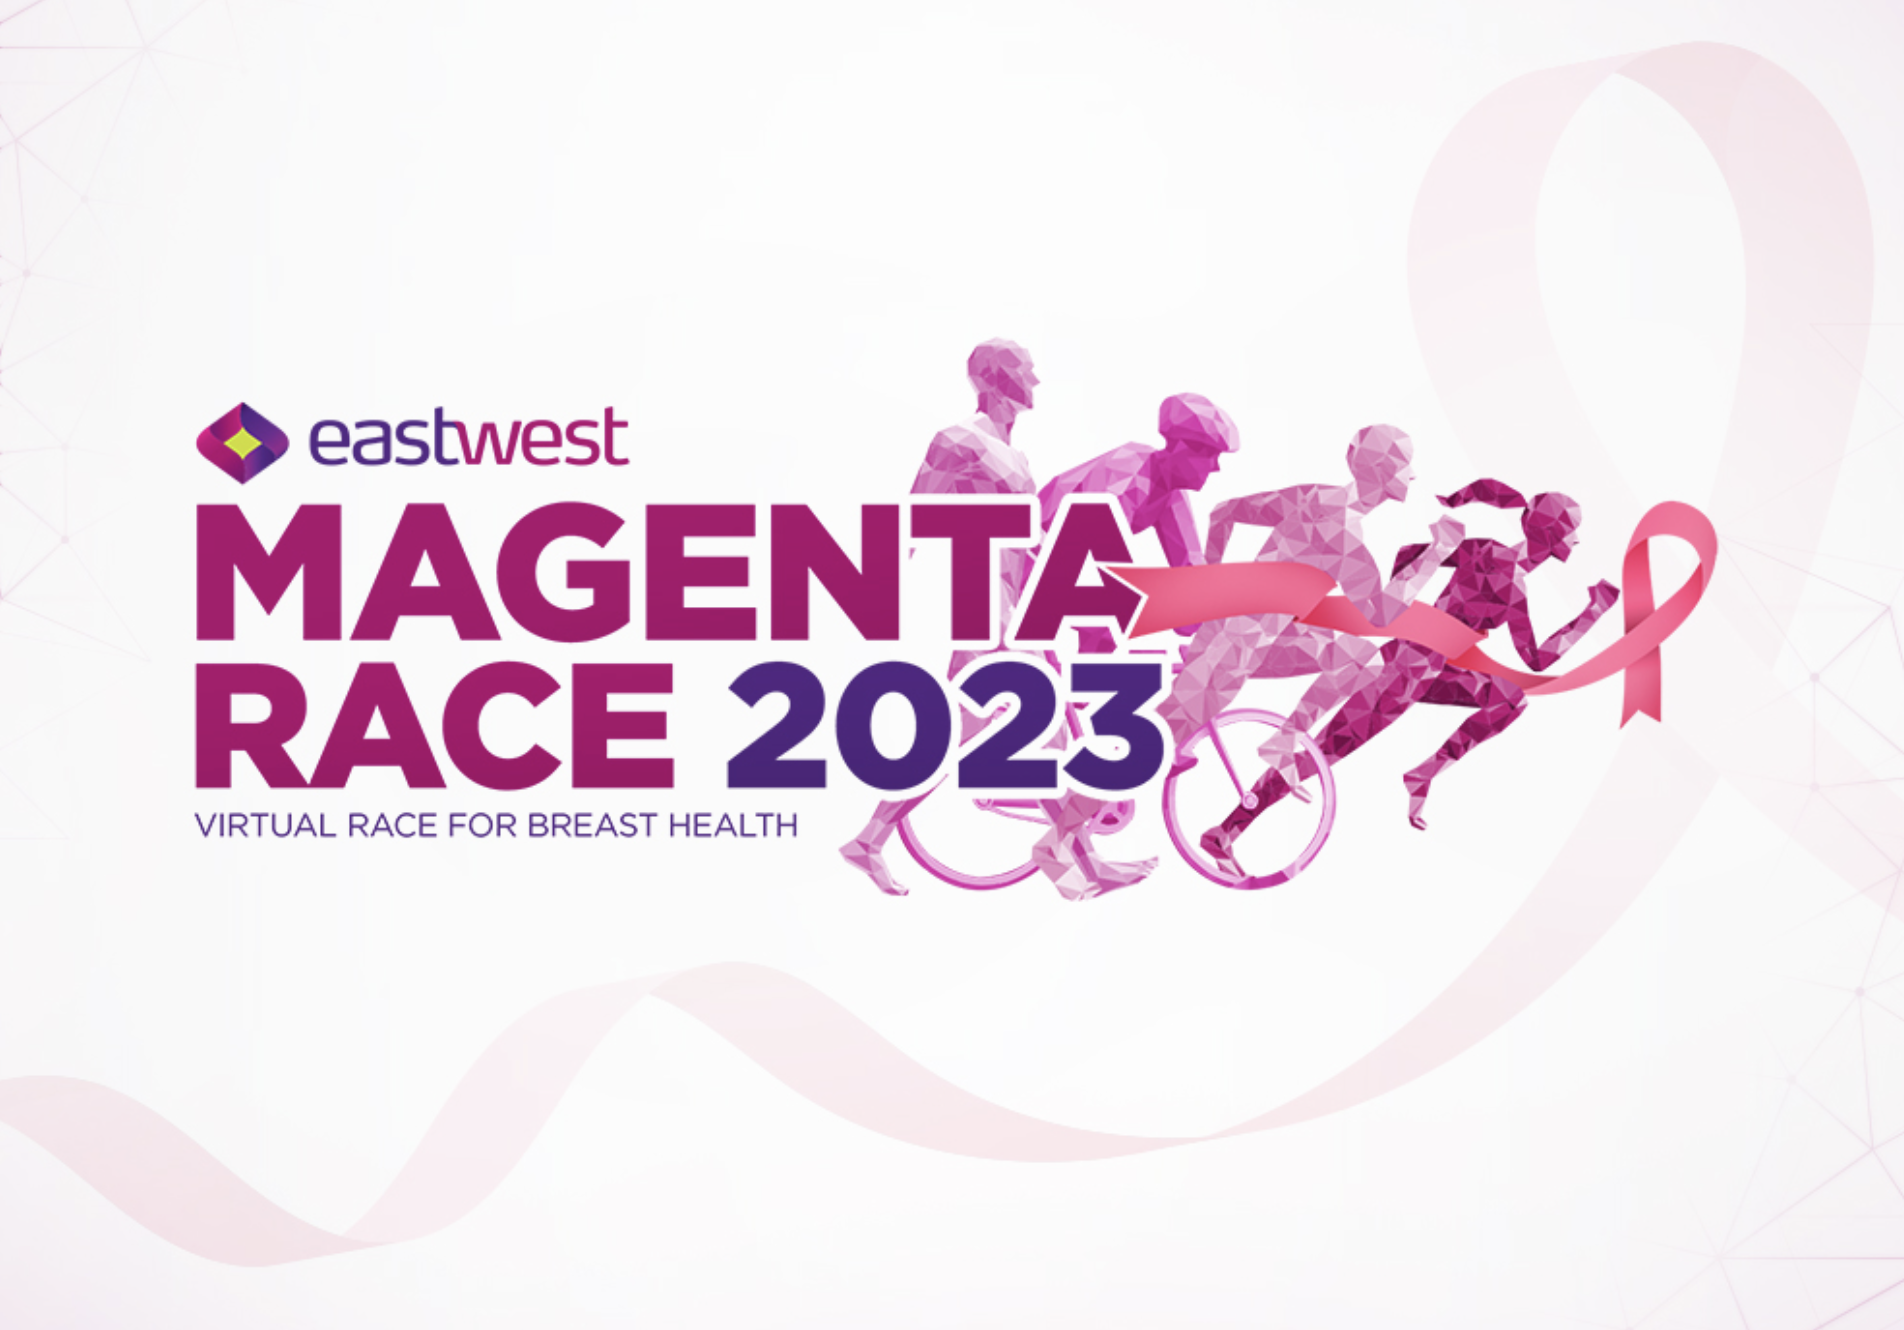 EASTWEST ANNOUNCES THE MAGENTA RACE 2023 IN SUPPORT OF BREAST CANCER AWARENESS MONTH AND KASUSO FOUNDATION